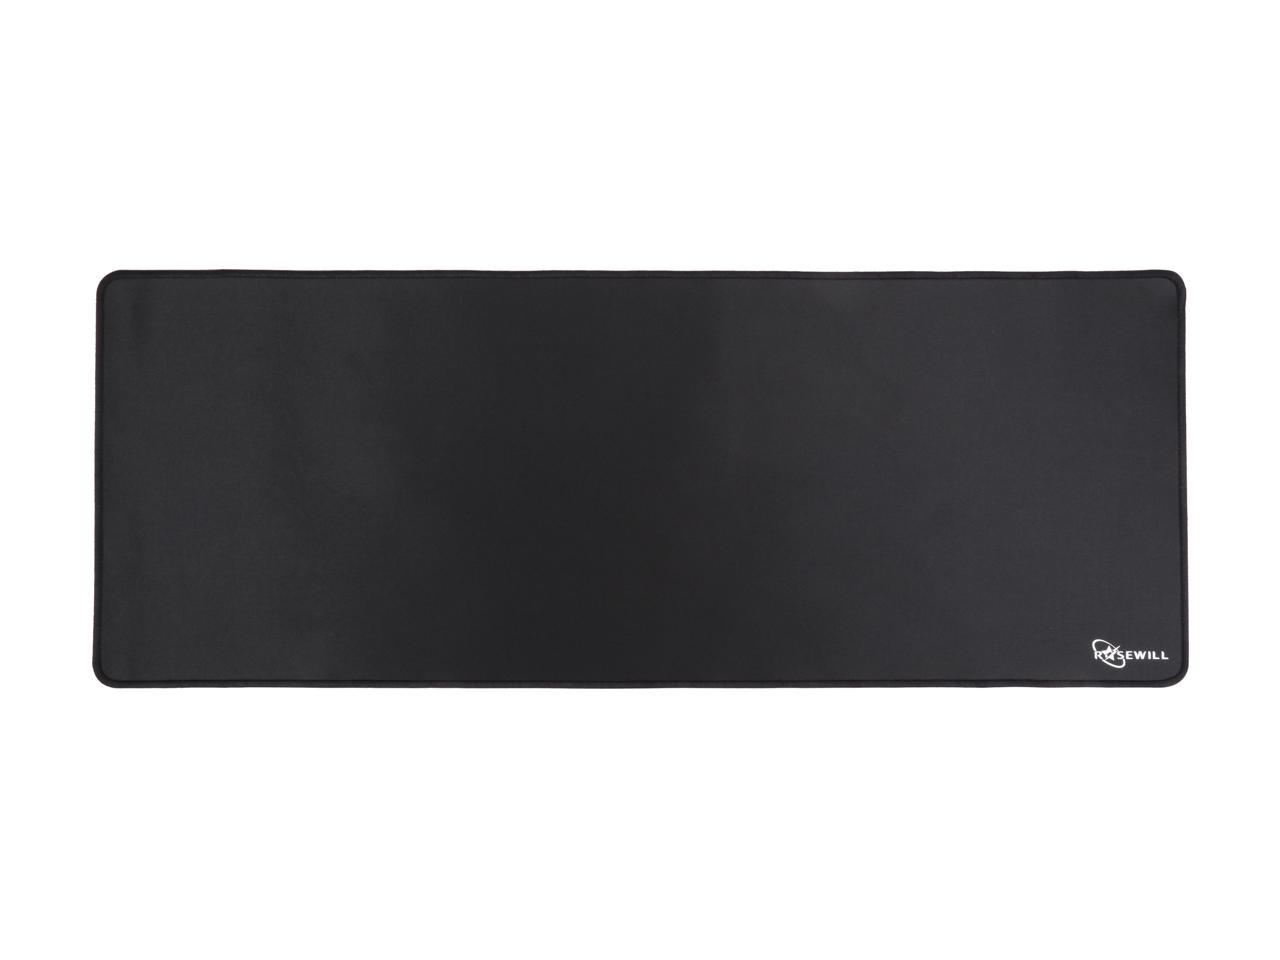 Rosewill Pro Gaming Mouse Pad - Extended XL - RGMP-700 - Newegg.com